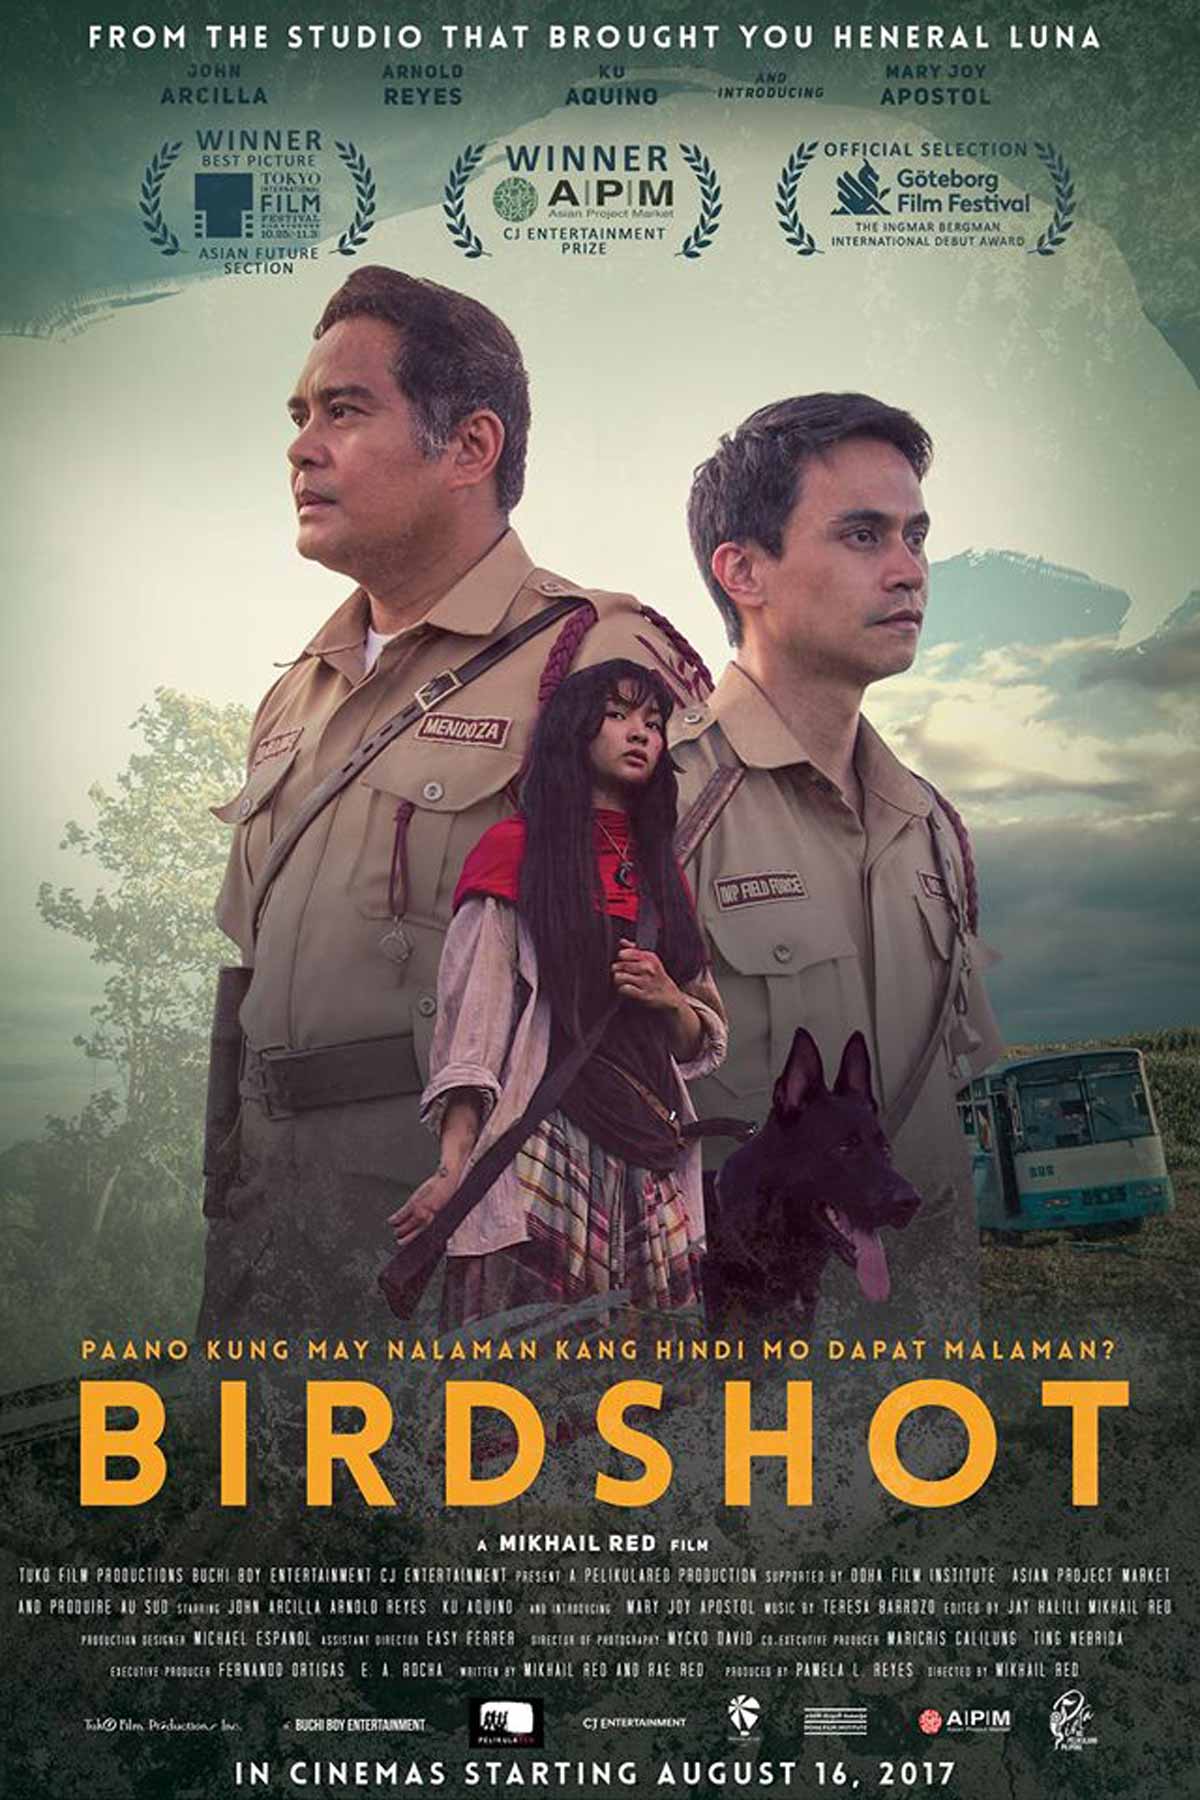 “Birdshot” by Mikhail Red of Pista ng Pelikulang Pilipino 2017 was the Philippine official entry to the Oscars in 2017.